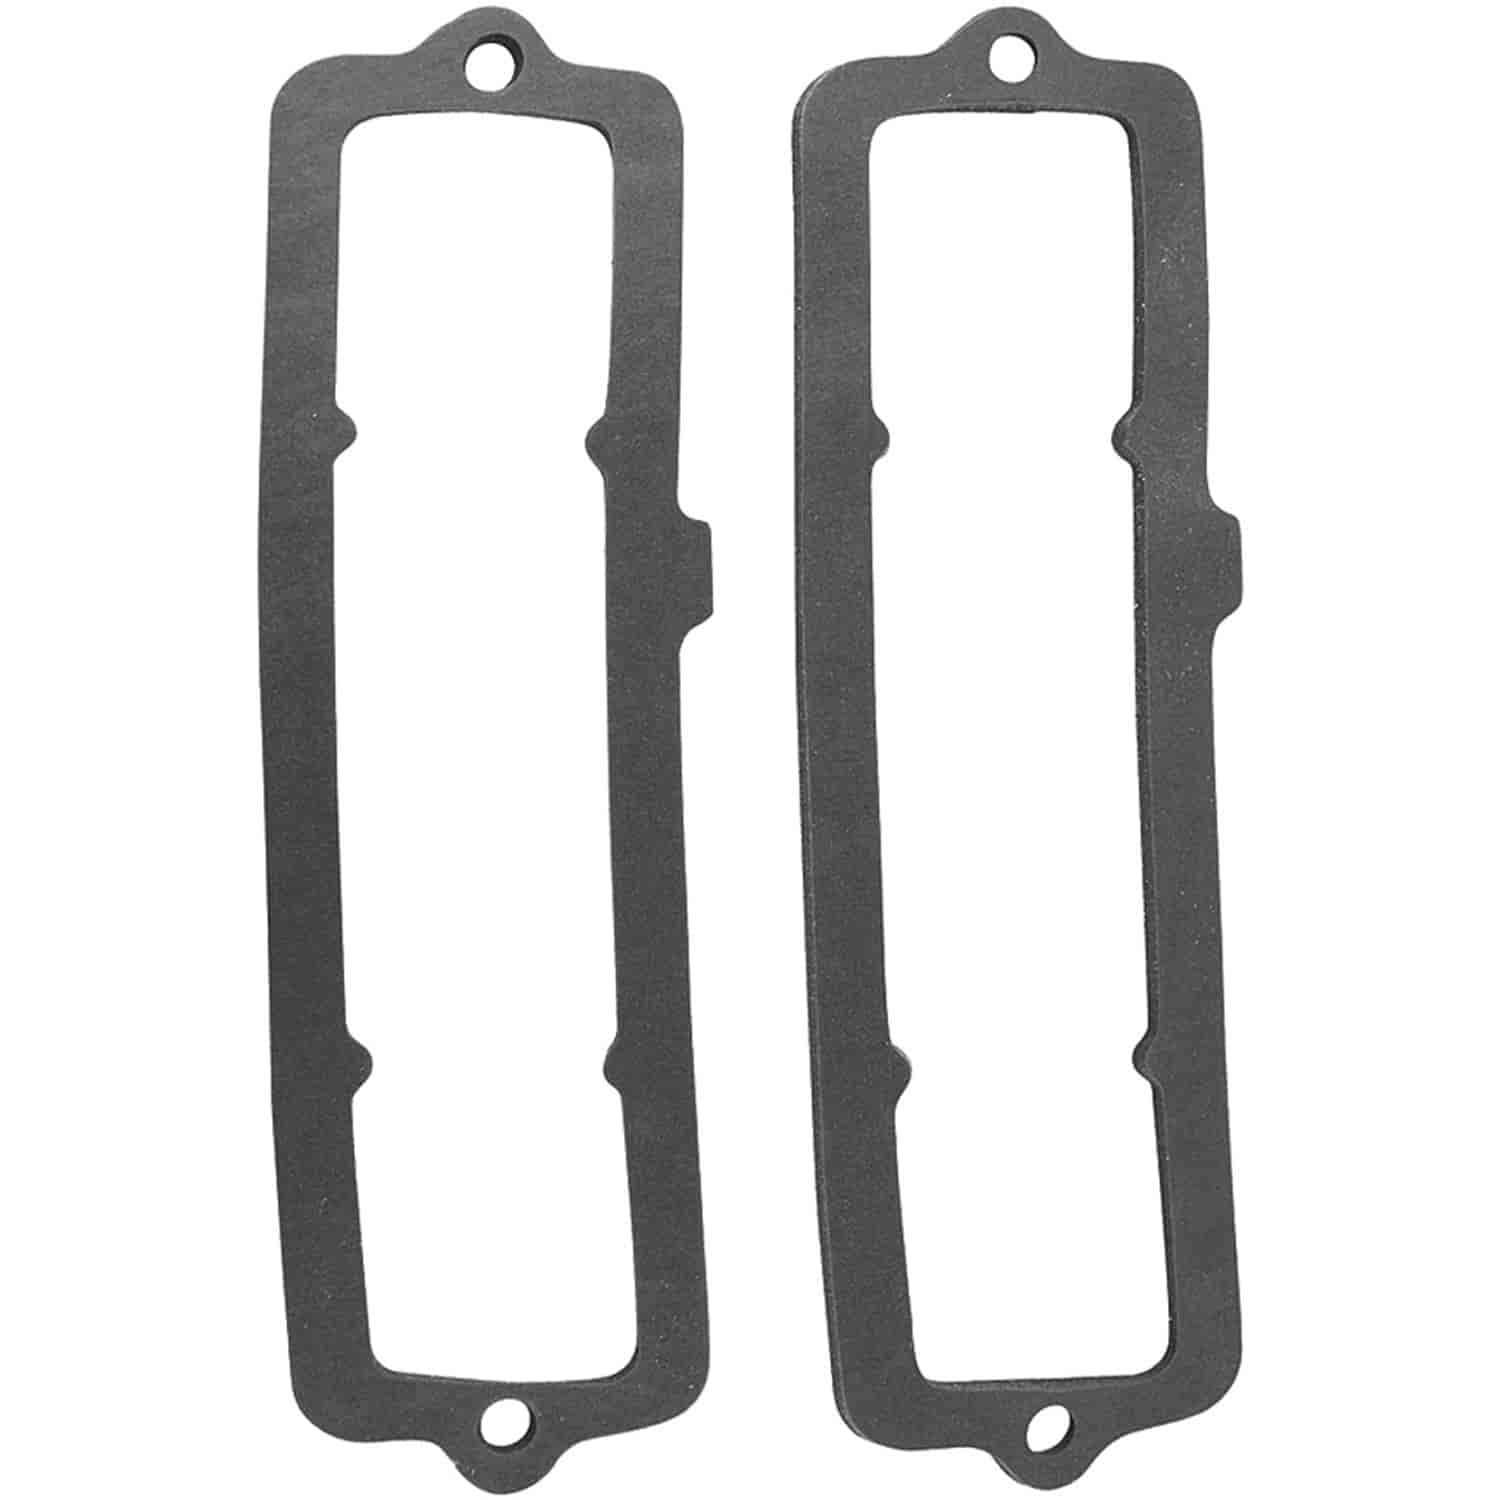 Gasket Rear Marker for 1971-1973 Buick Riviera [Pair]